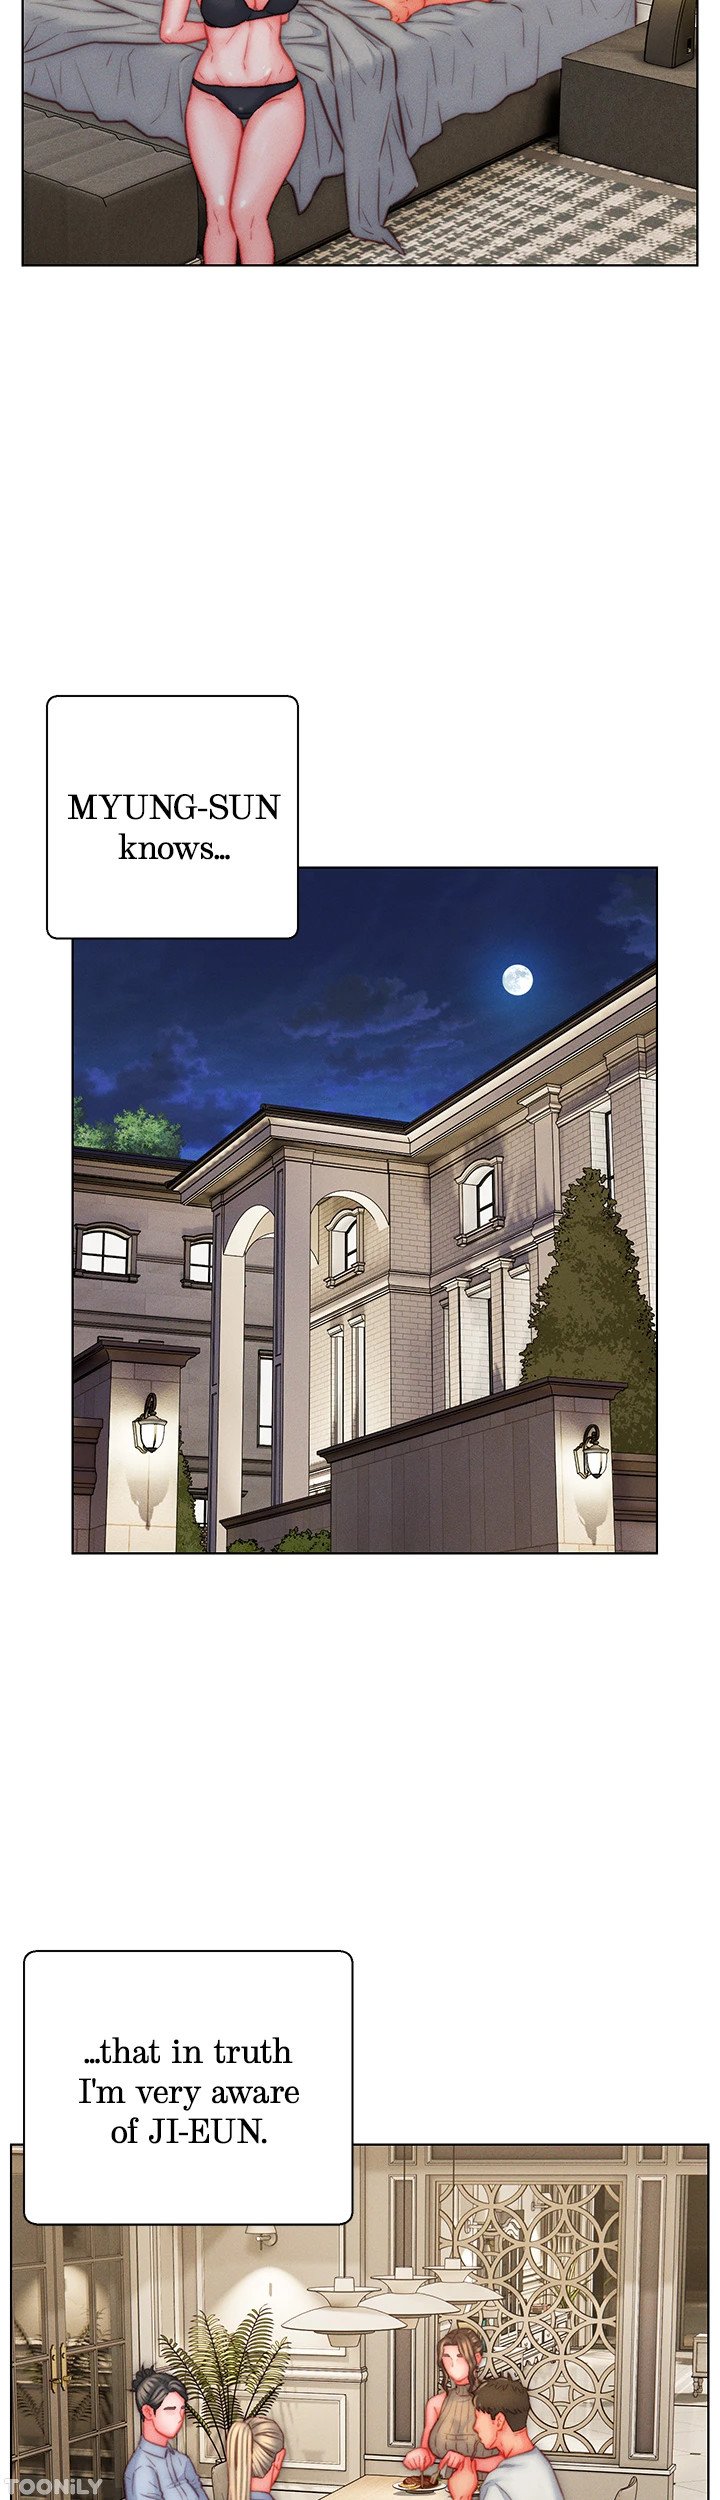 live-in-son-in-law-chap-38-9